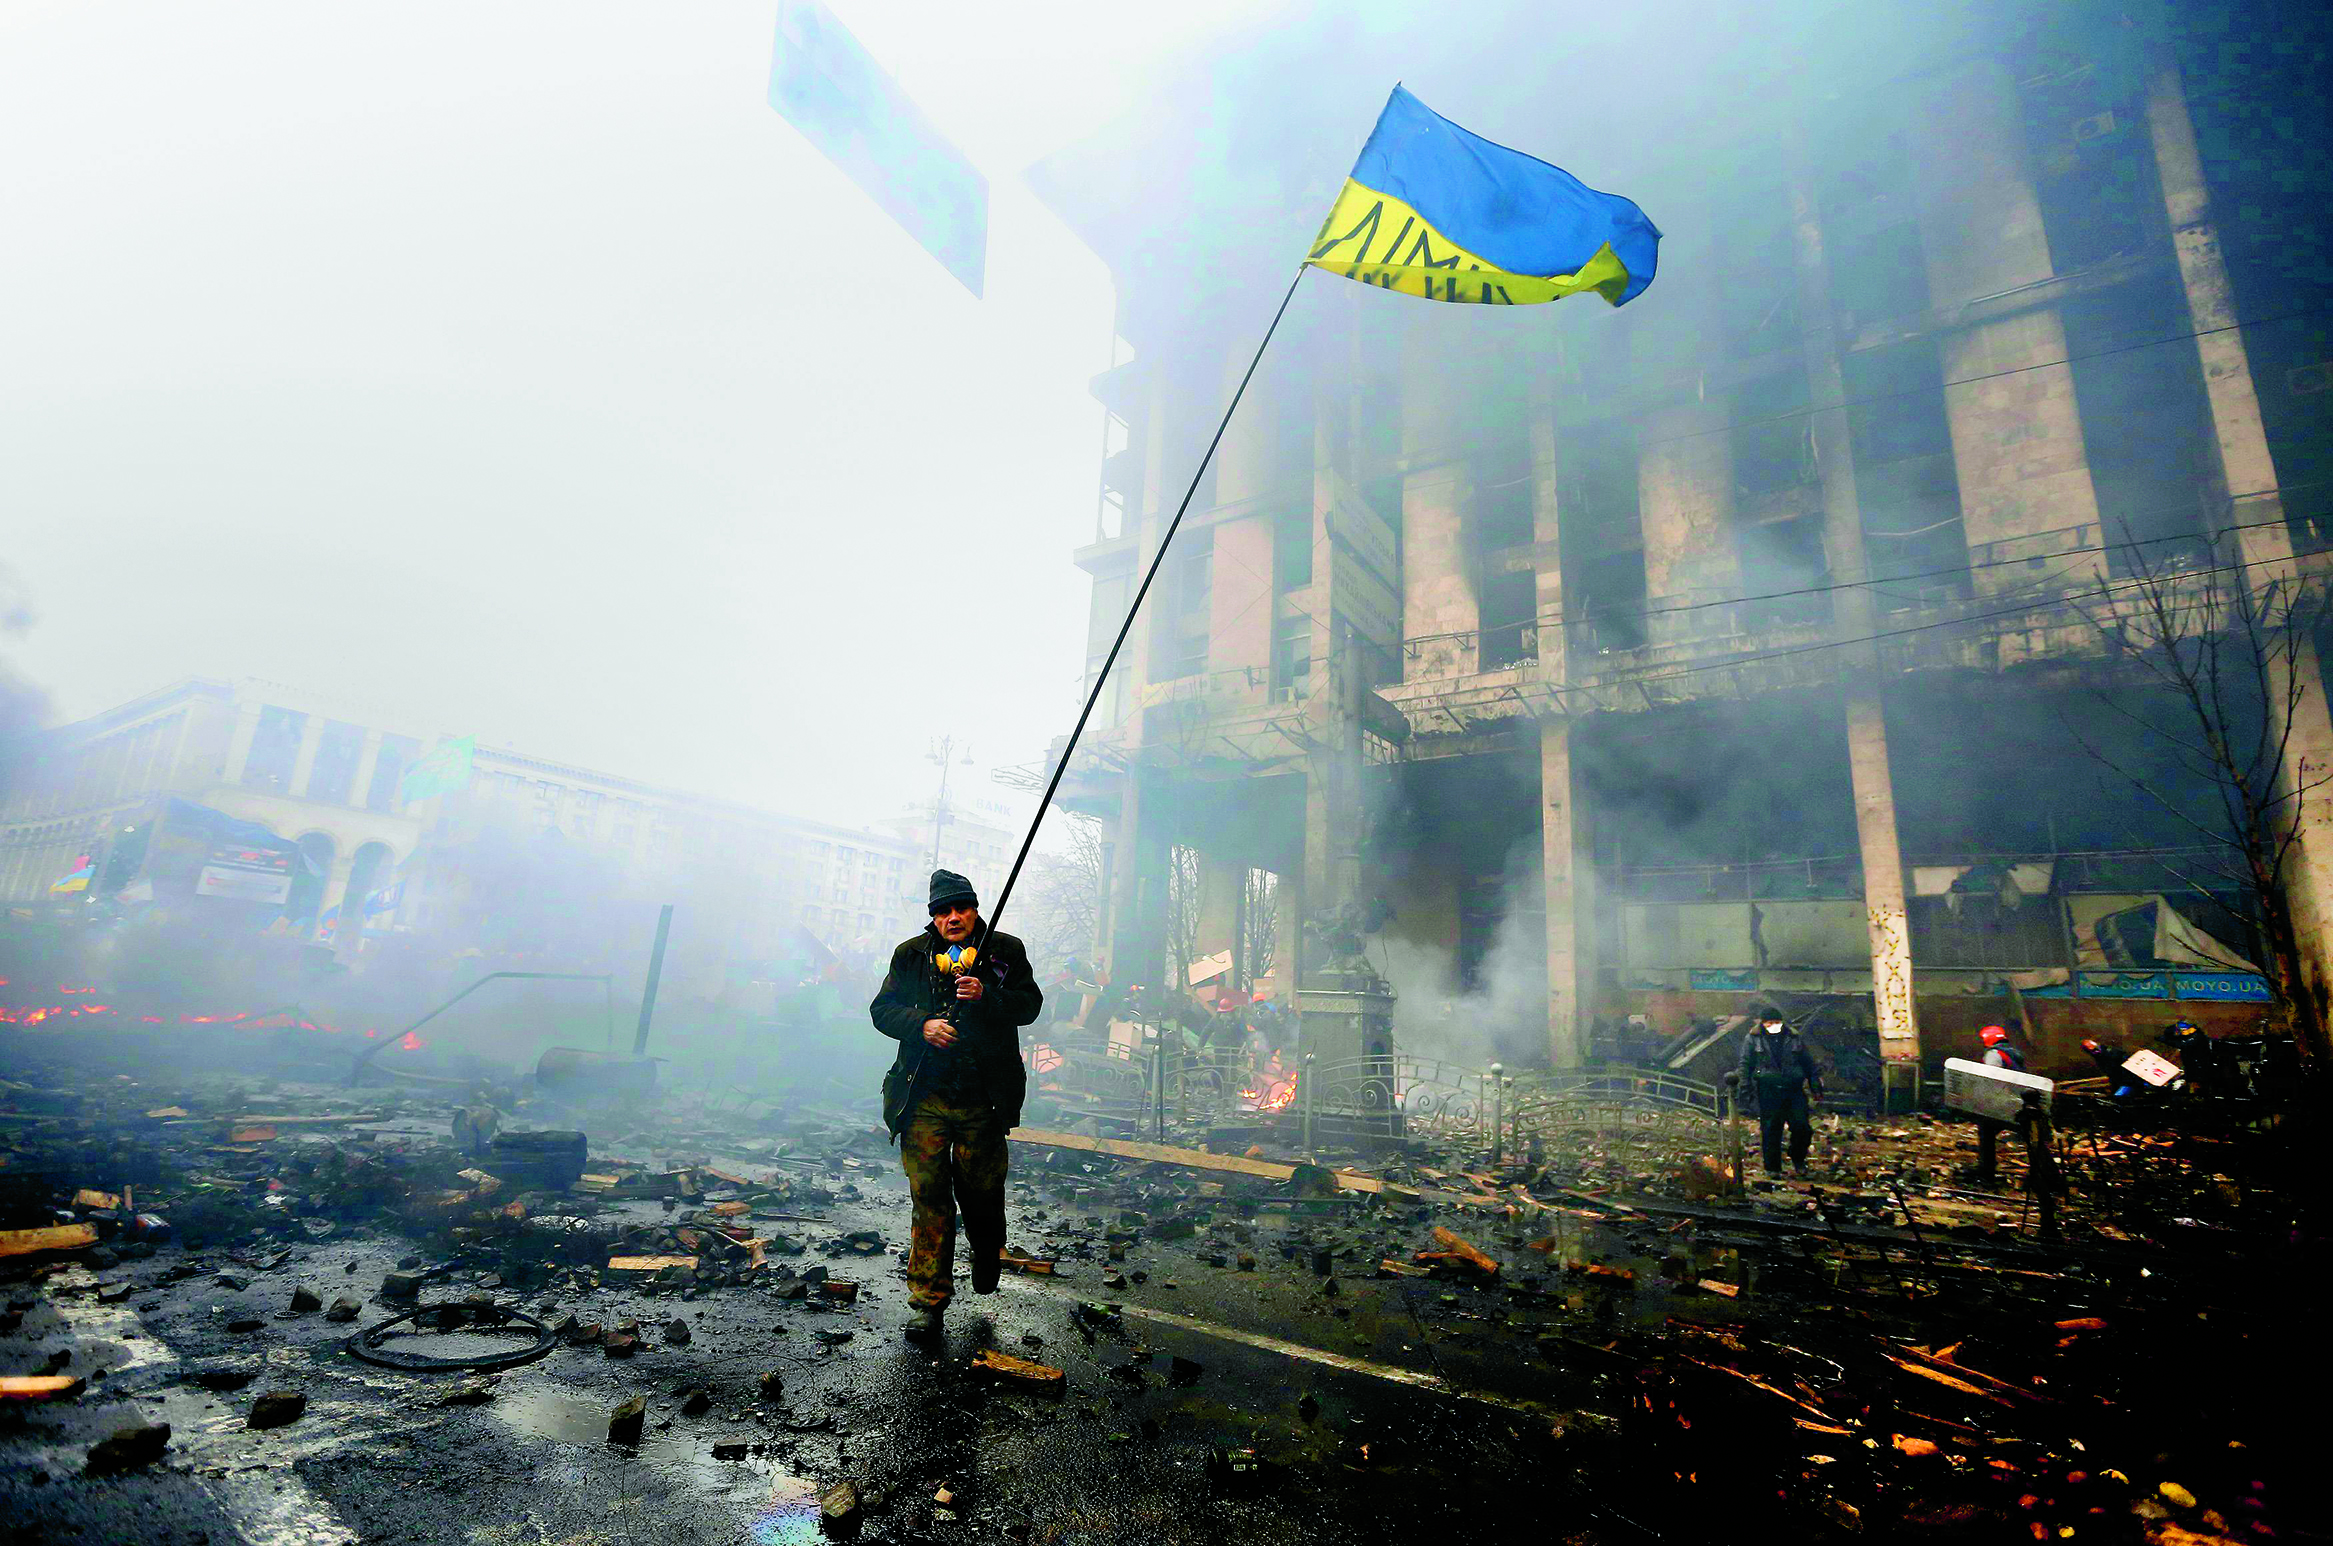 An anti-government protester holds a Ukranian flag as he advances through burning barricades in Kiev’s Independence Square February 20, 2014. Ukrainian protesters hurling petrol bombs and paving stones drove riot police from the central square in Kiev on Thursday despite a “truce” which embattled Ukrainian President Viktor Yanukovich said he had agreed with opposition leaders.  REUTERS/Yannis Behrakis (UKRAINE – Tags: CIVIL UNREST POLITICS TPX IMAGES OF THE DAY) ORG XMIT: YAN10